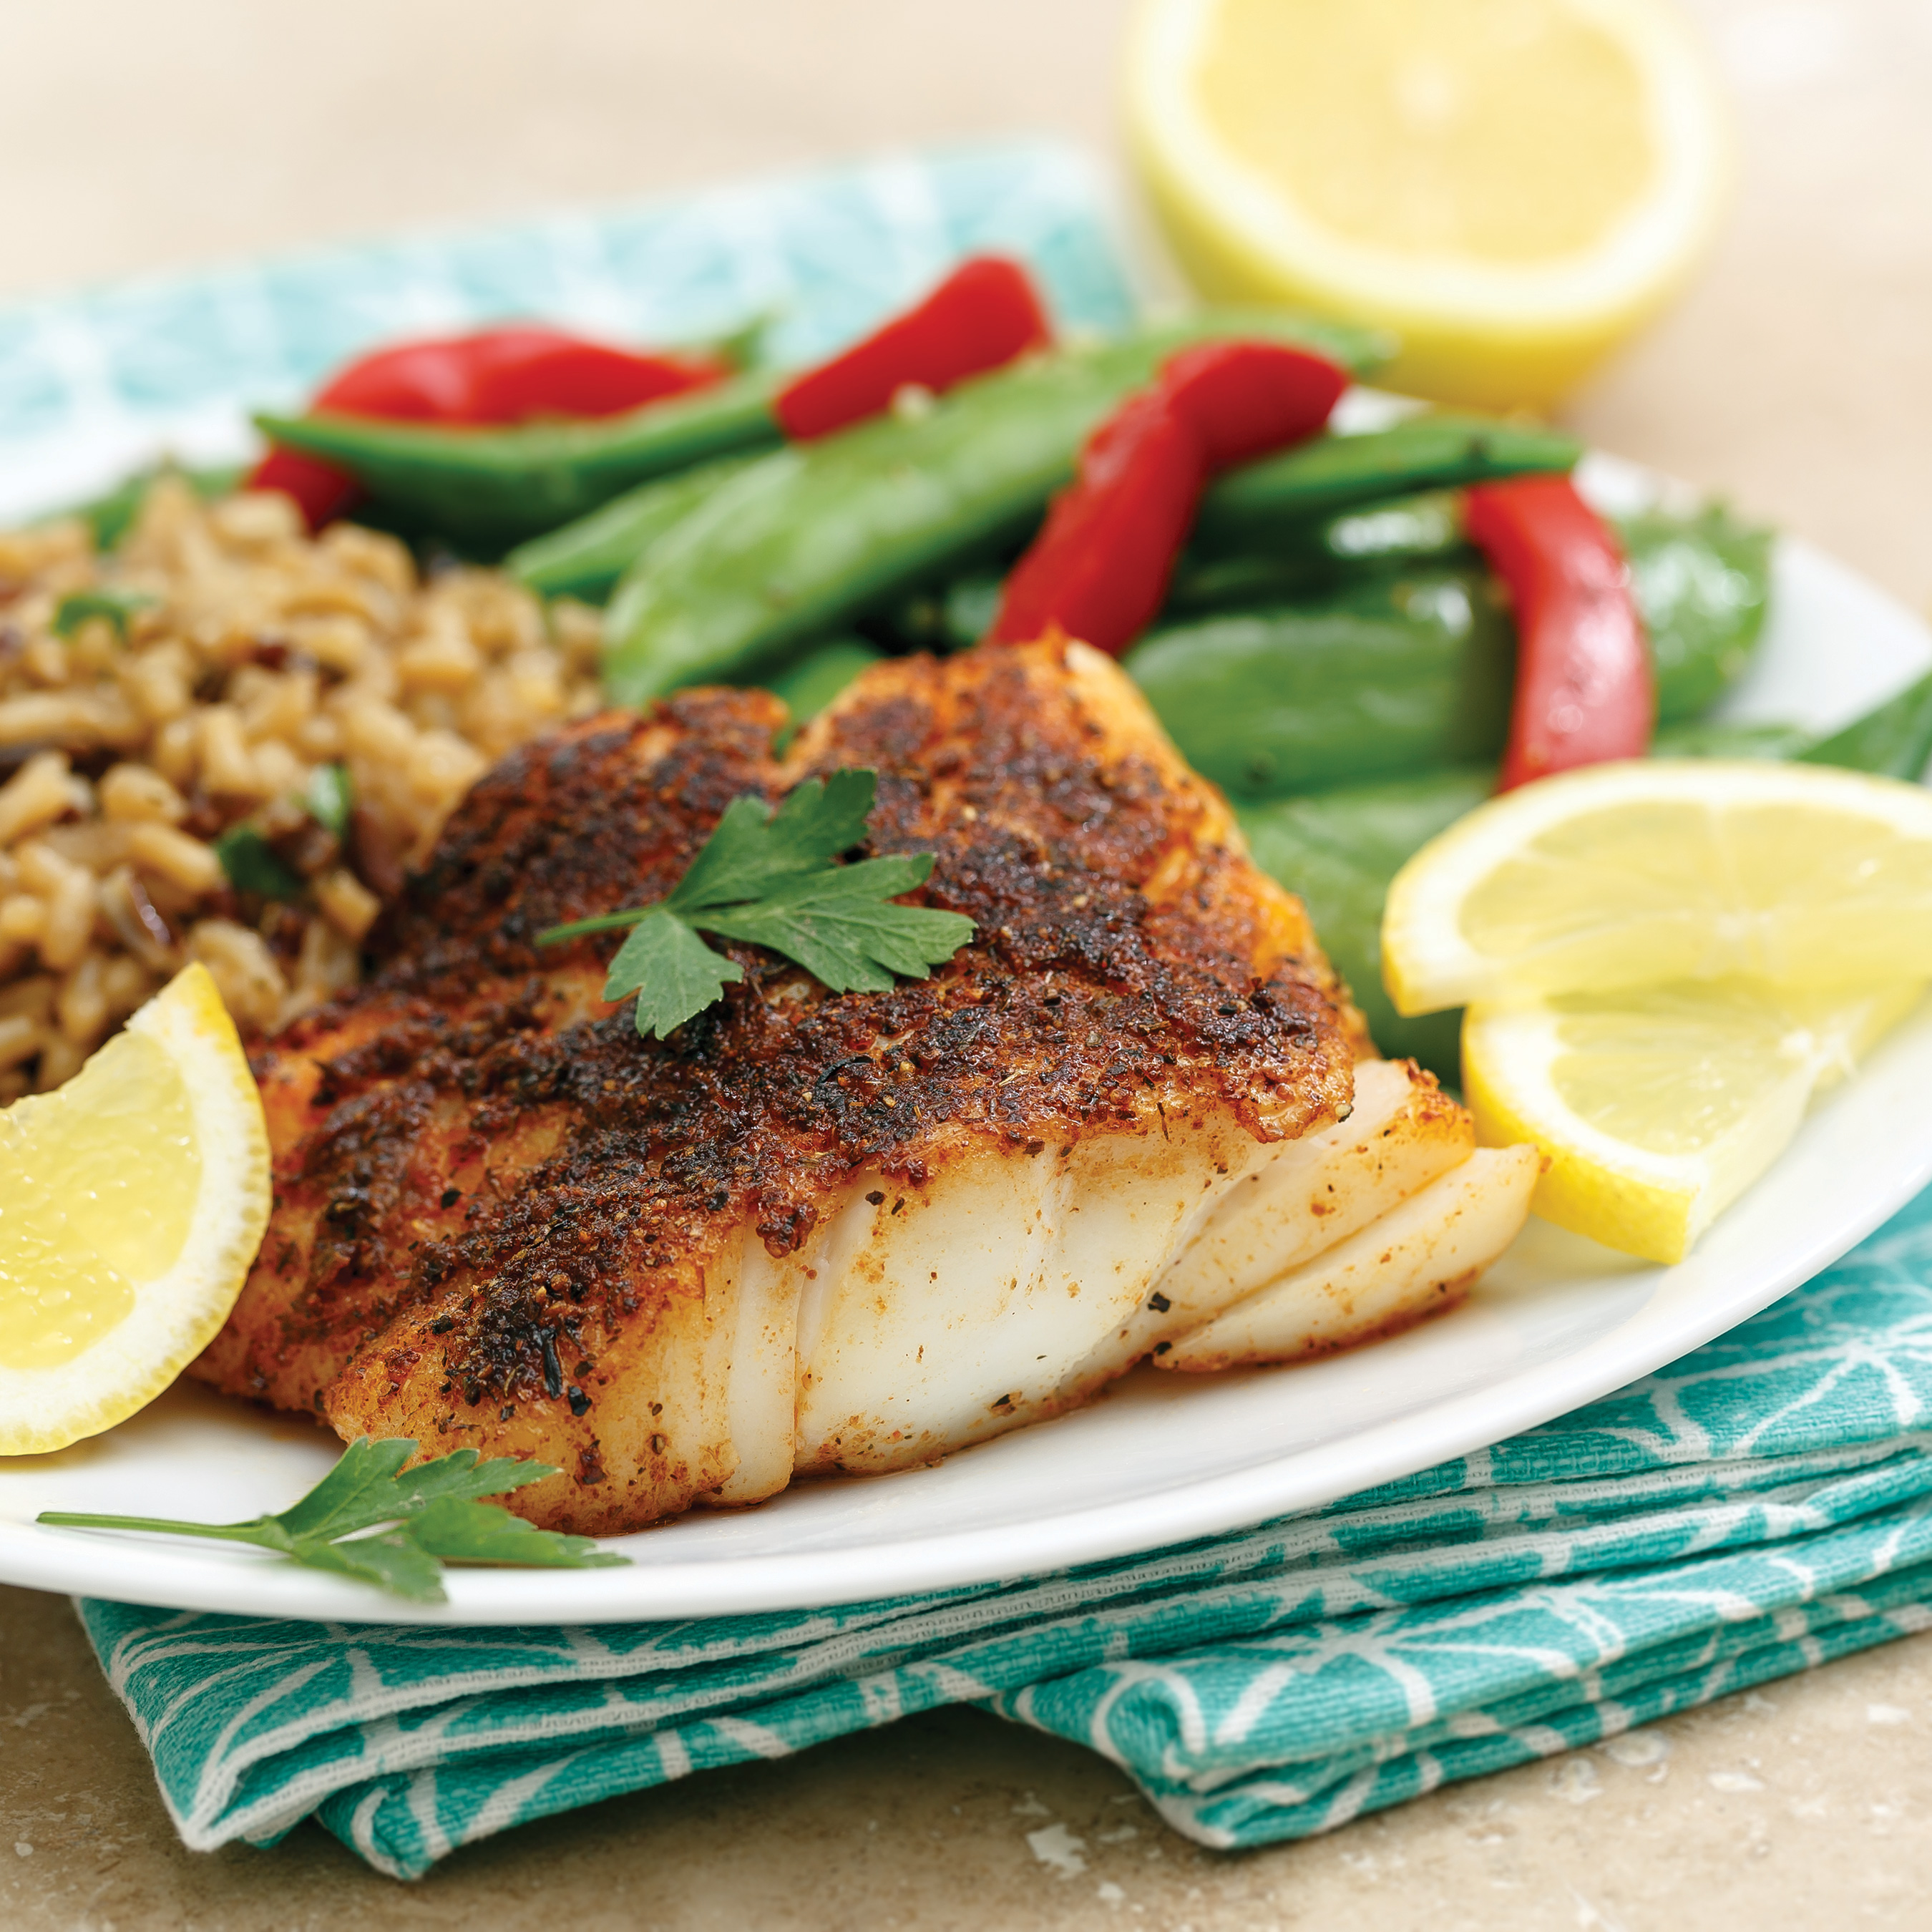 Blackened cod infuses big flavor without the guilt of butter and mayonnaise-based sauces.